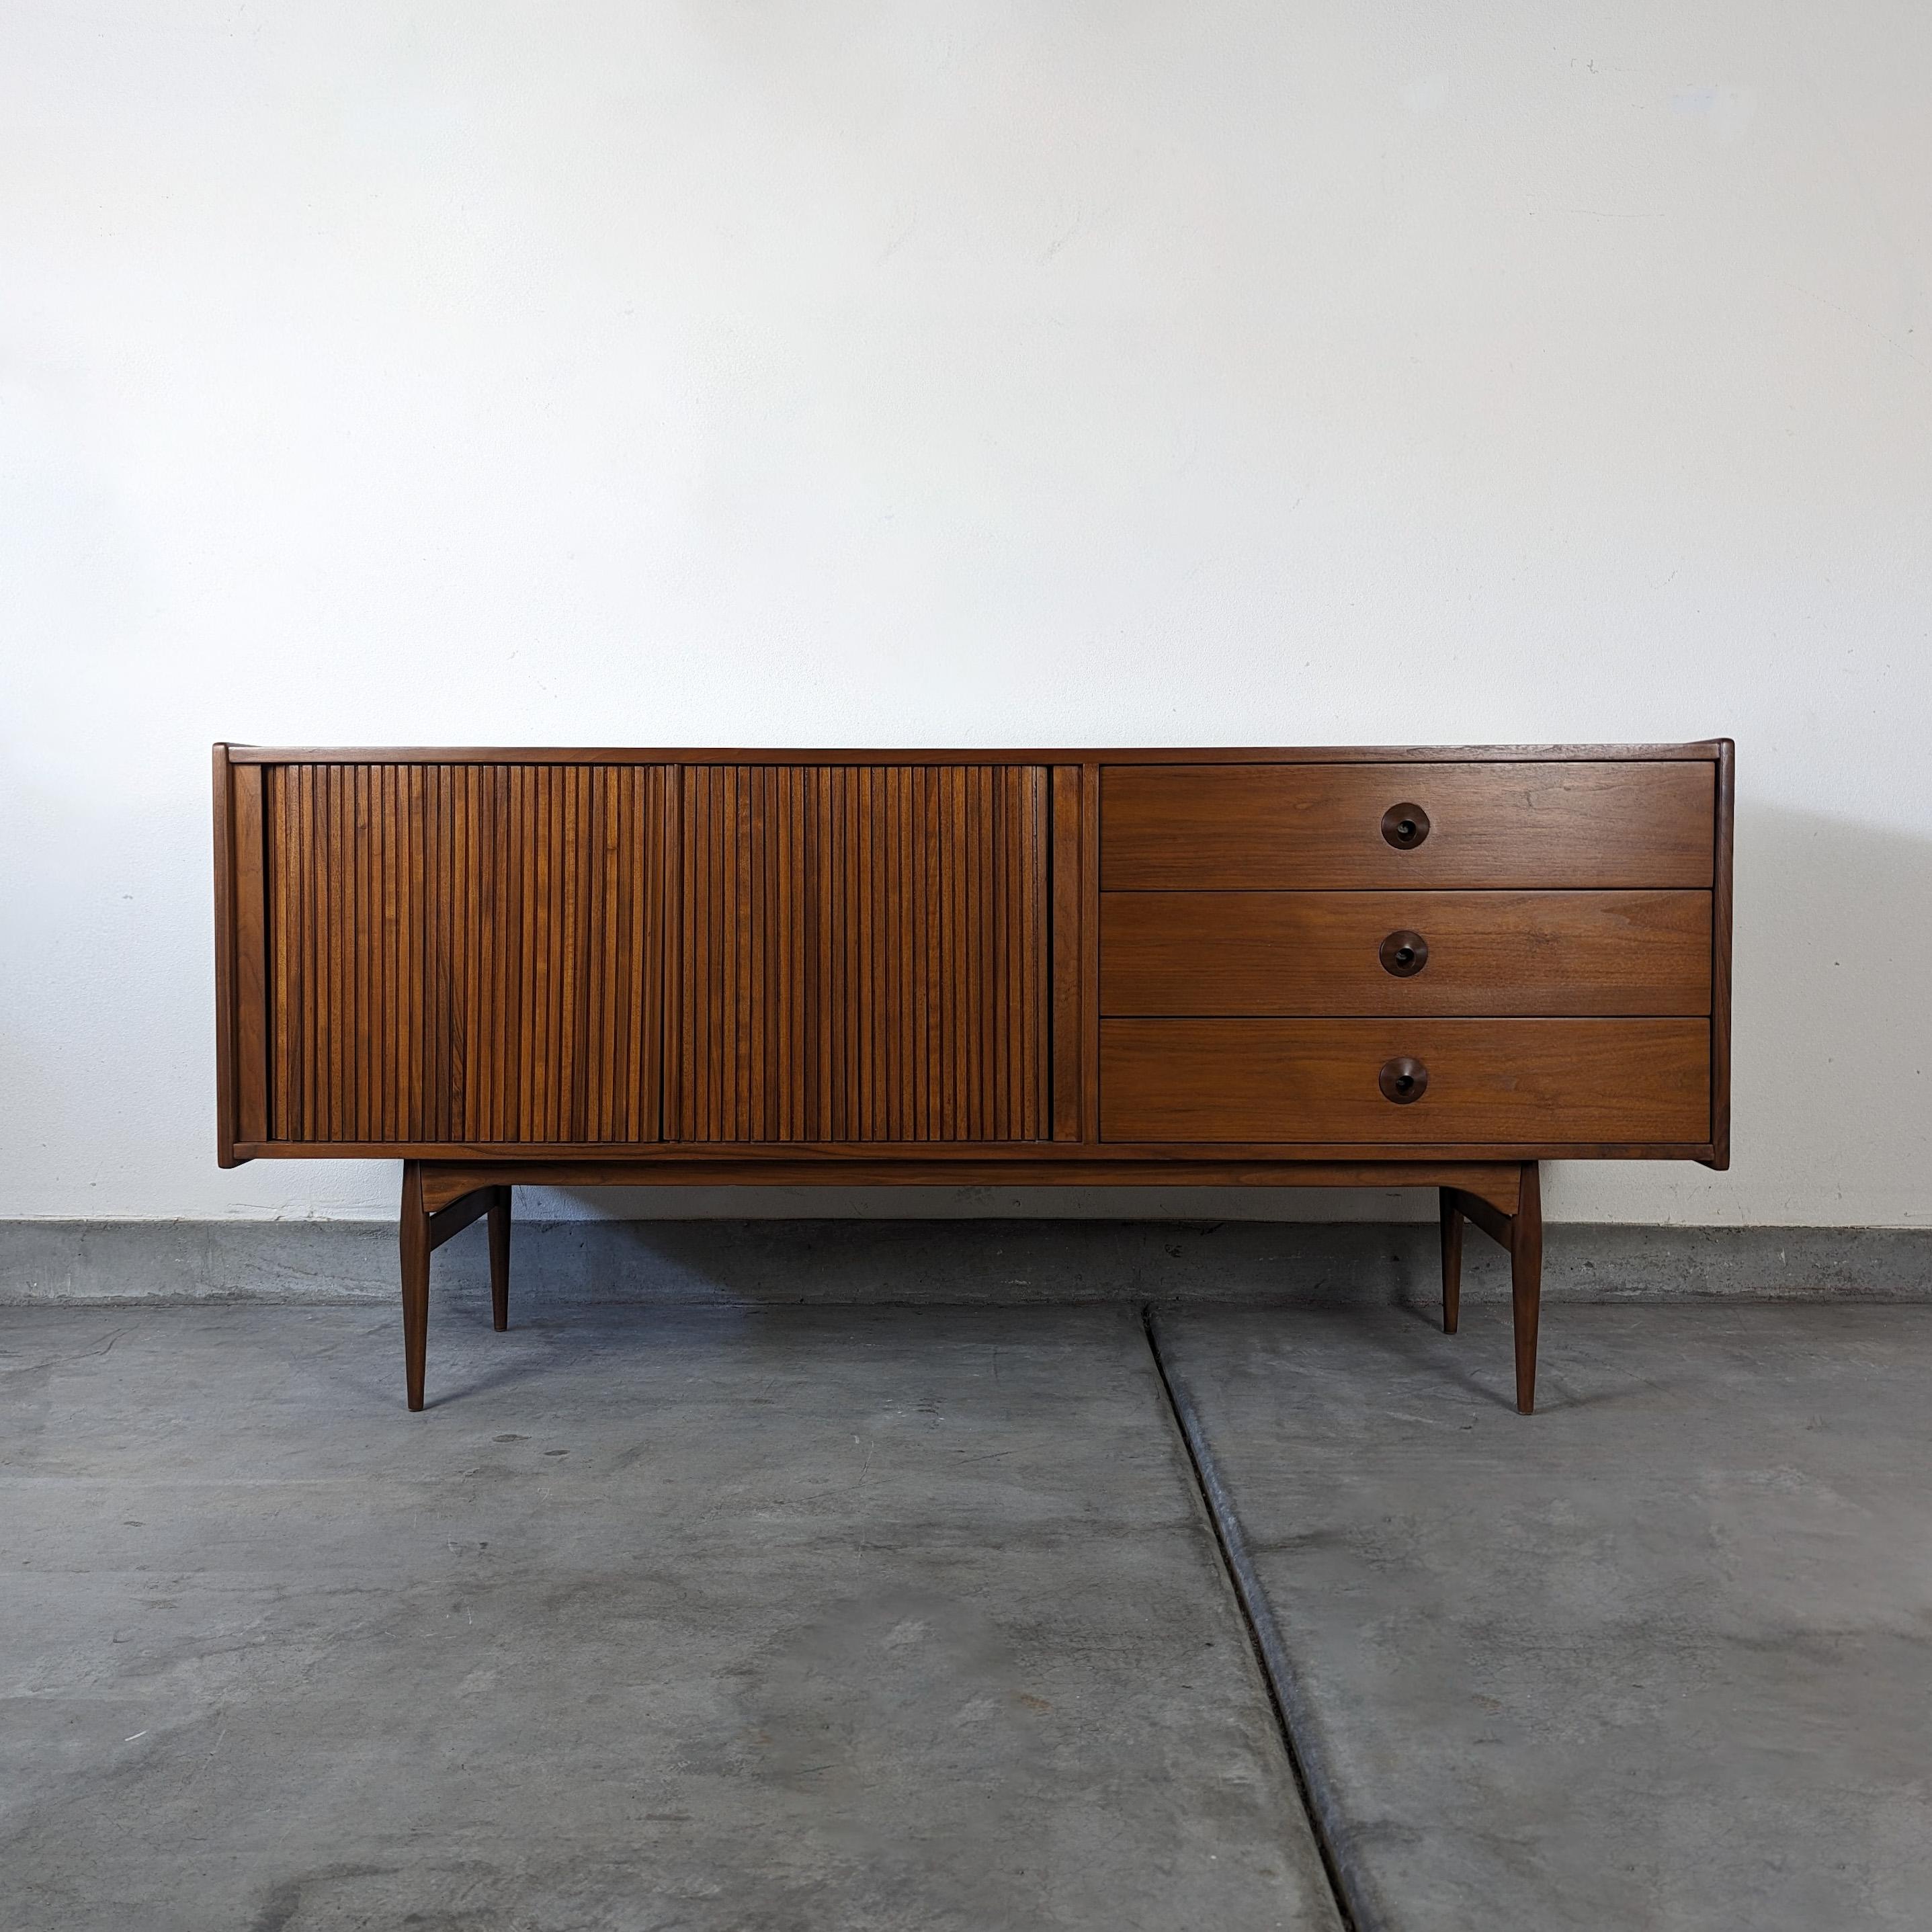 Introducing the epitome of mid-century modern elegance! This exquisite tambour door credenza, designed by John Keal & expertly manufactured by the renowned furniture brand Brown Saltman, is a true testament to timeless design and impeccable